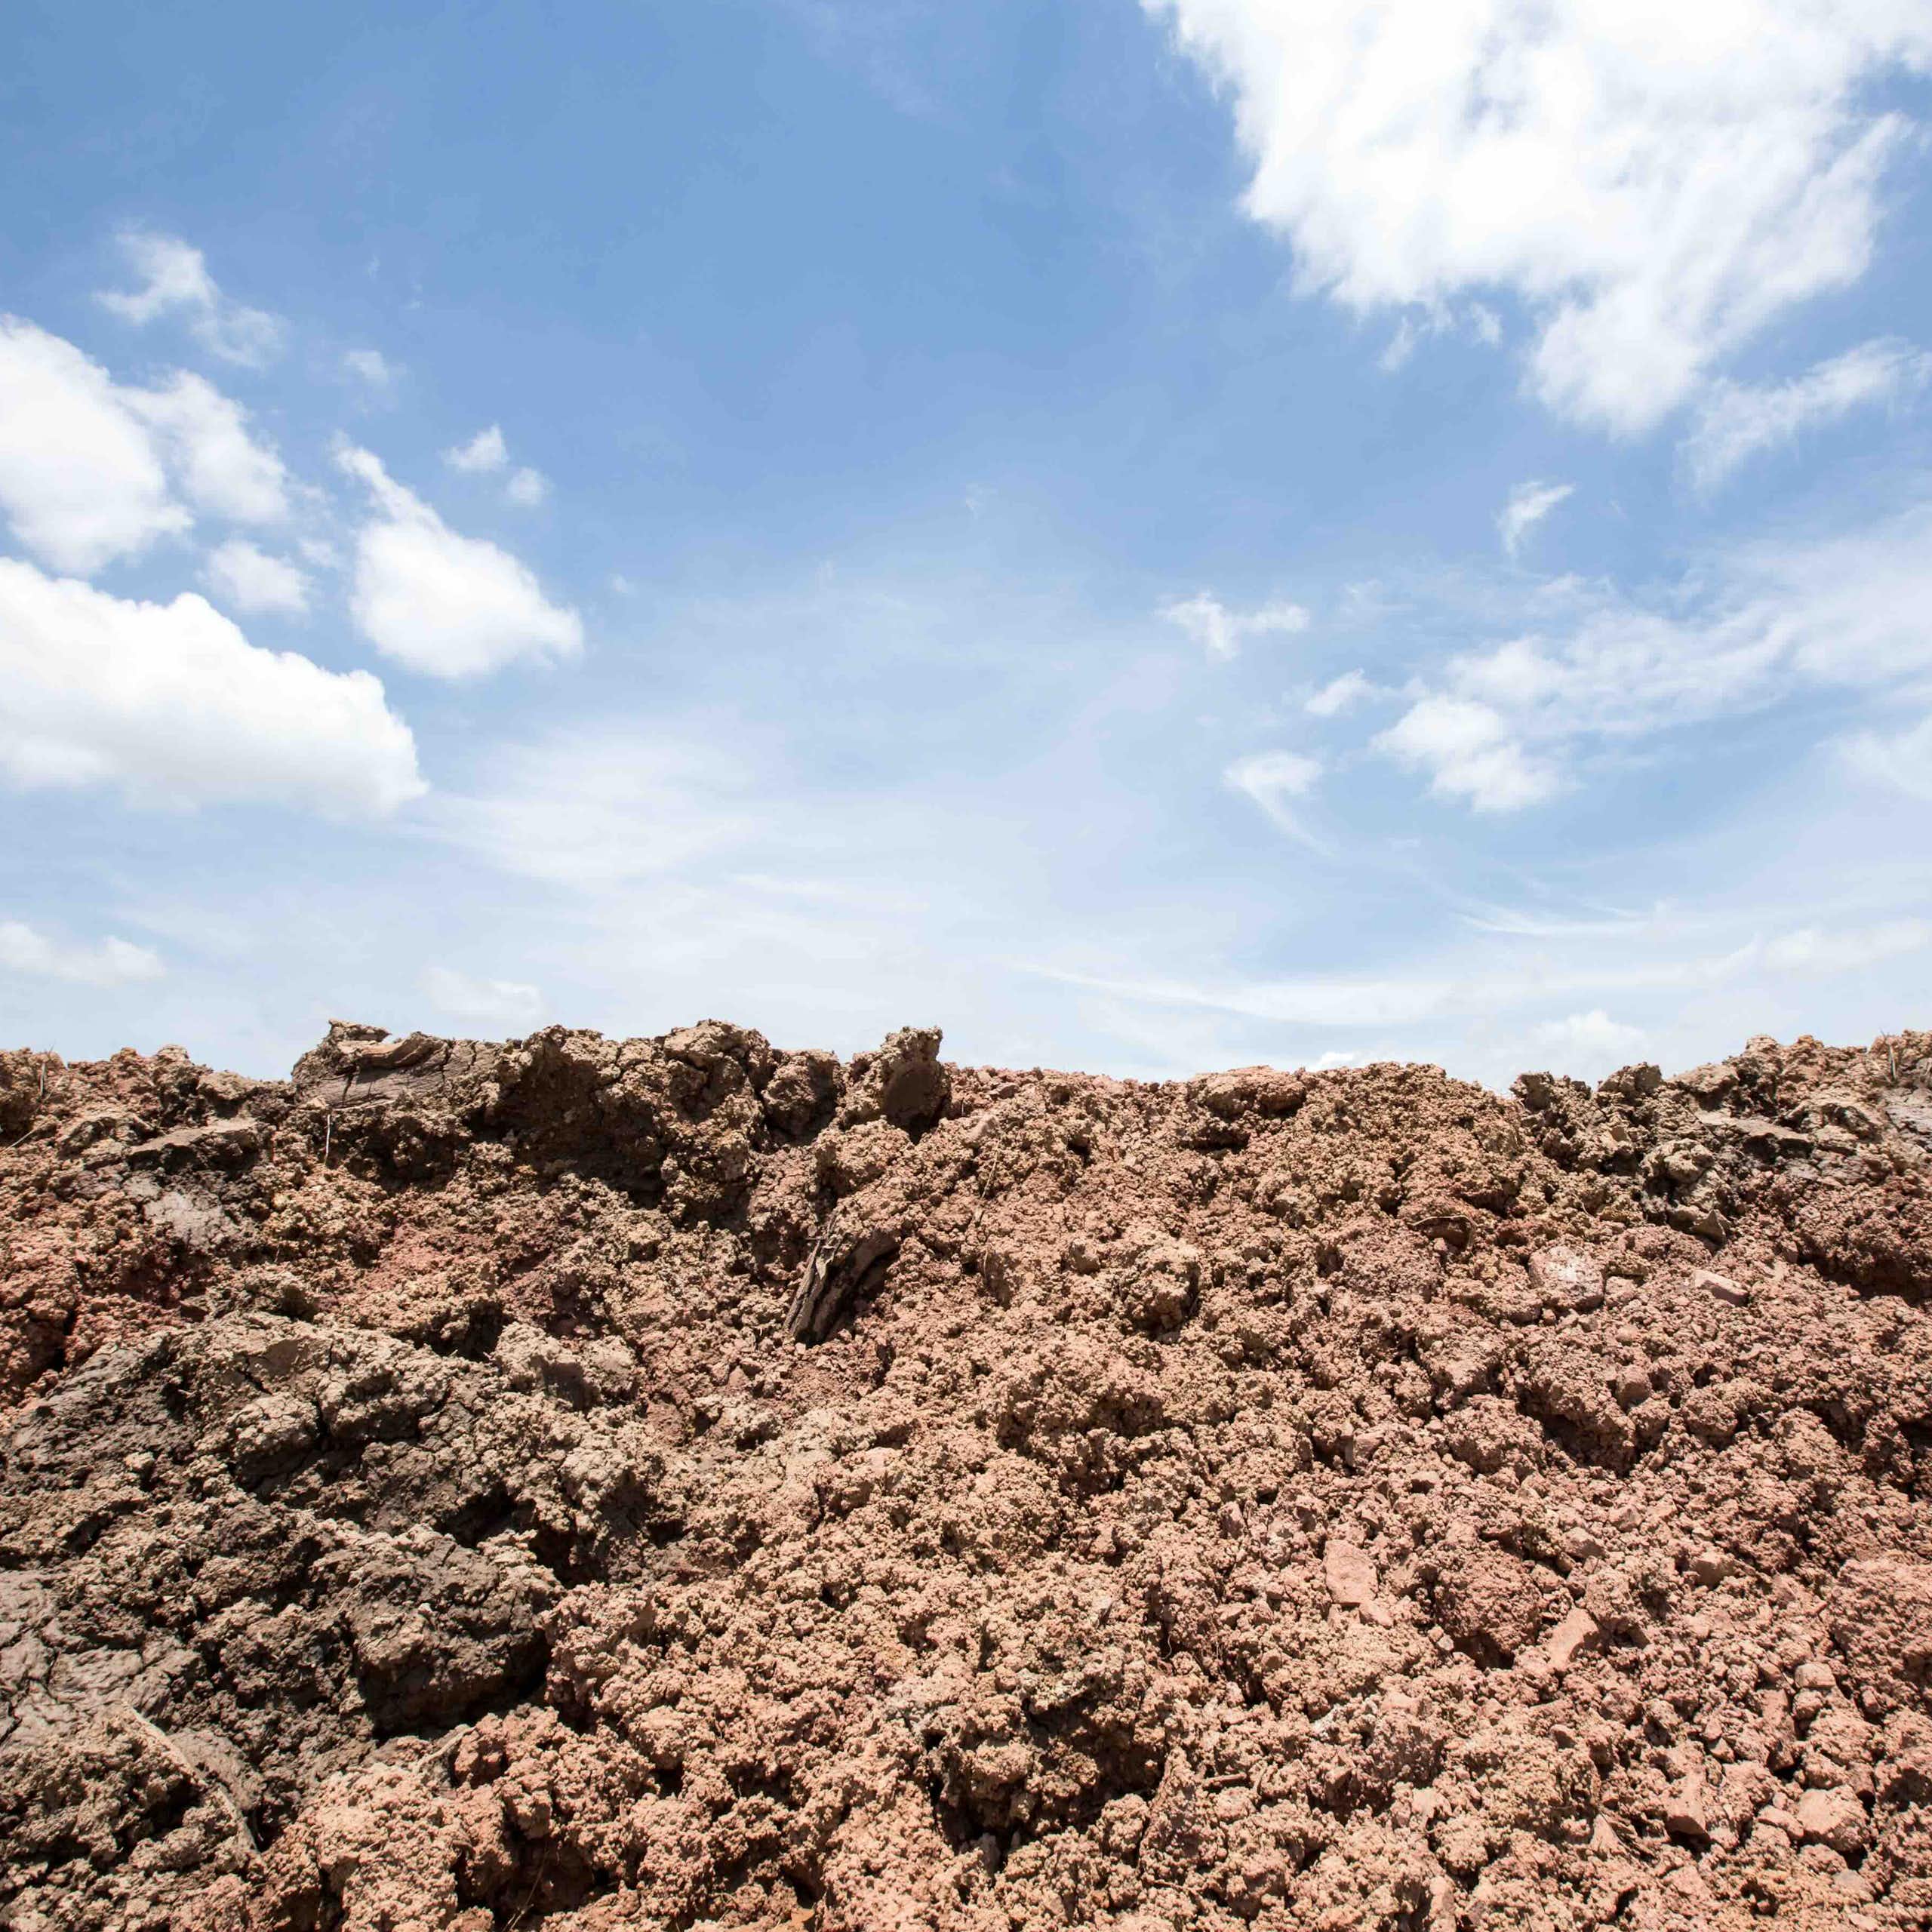 Photo showing disturbed soil beneath a blue sky with some white clouds.